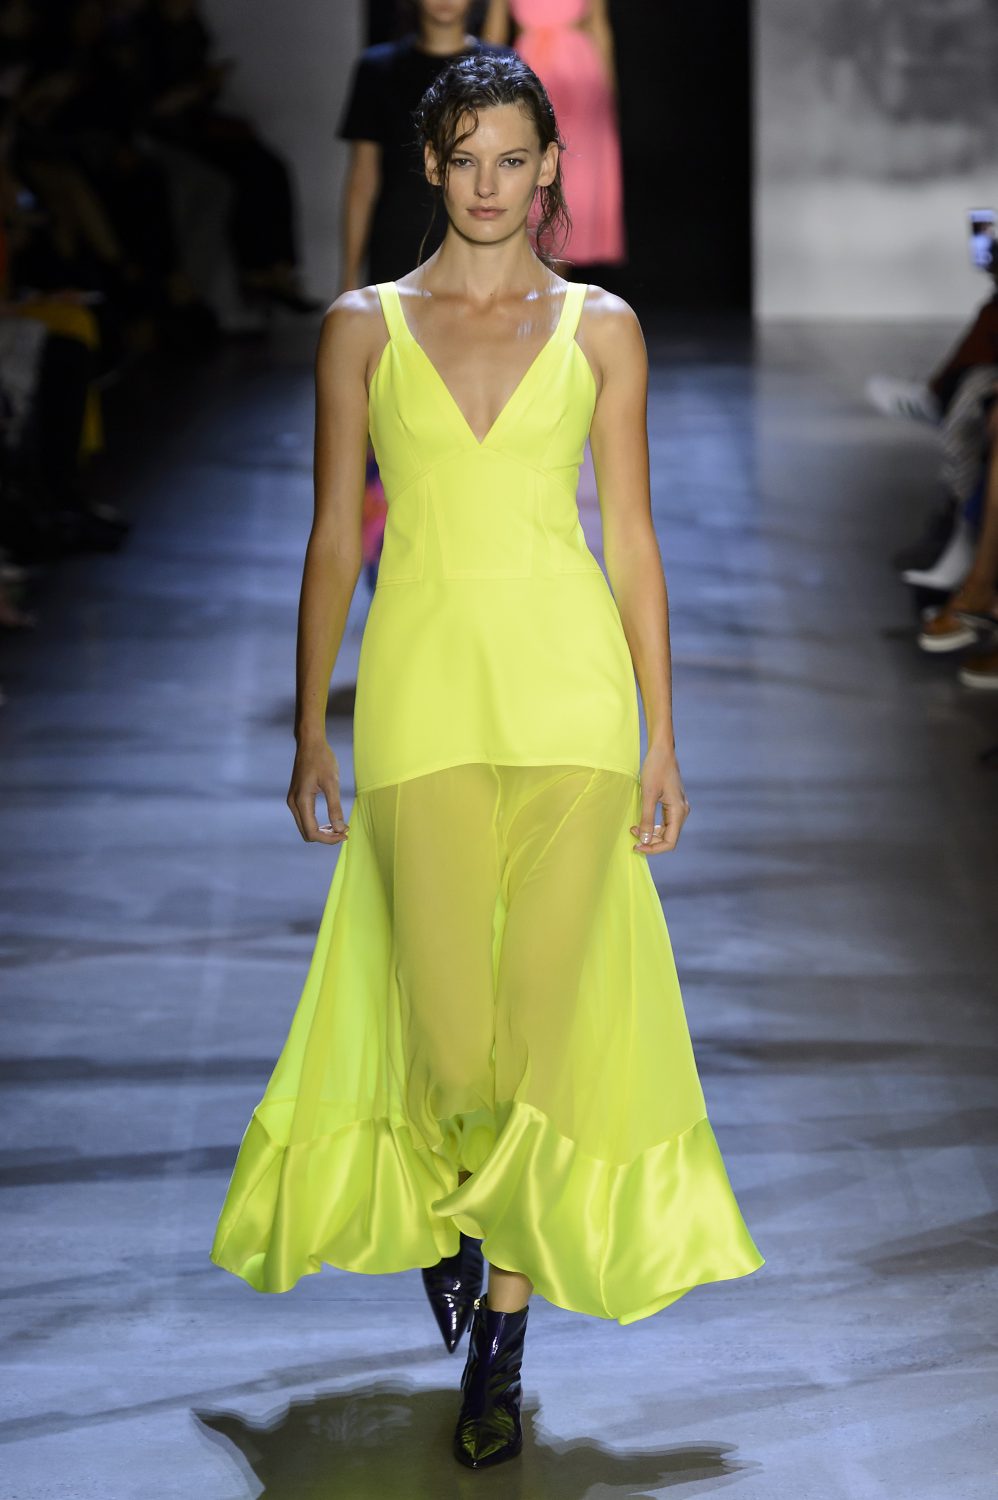 Neon Is The Controversial Trend Brightening Up The Runway | Fashion | MOJEH